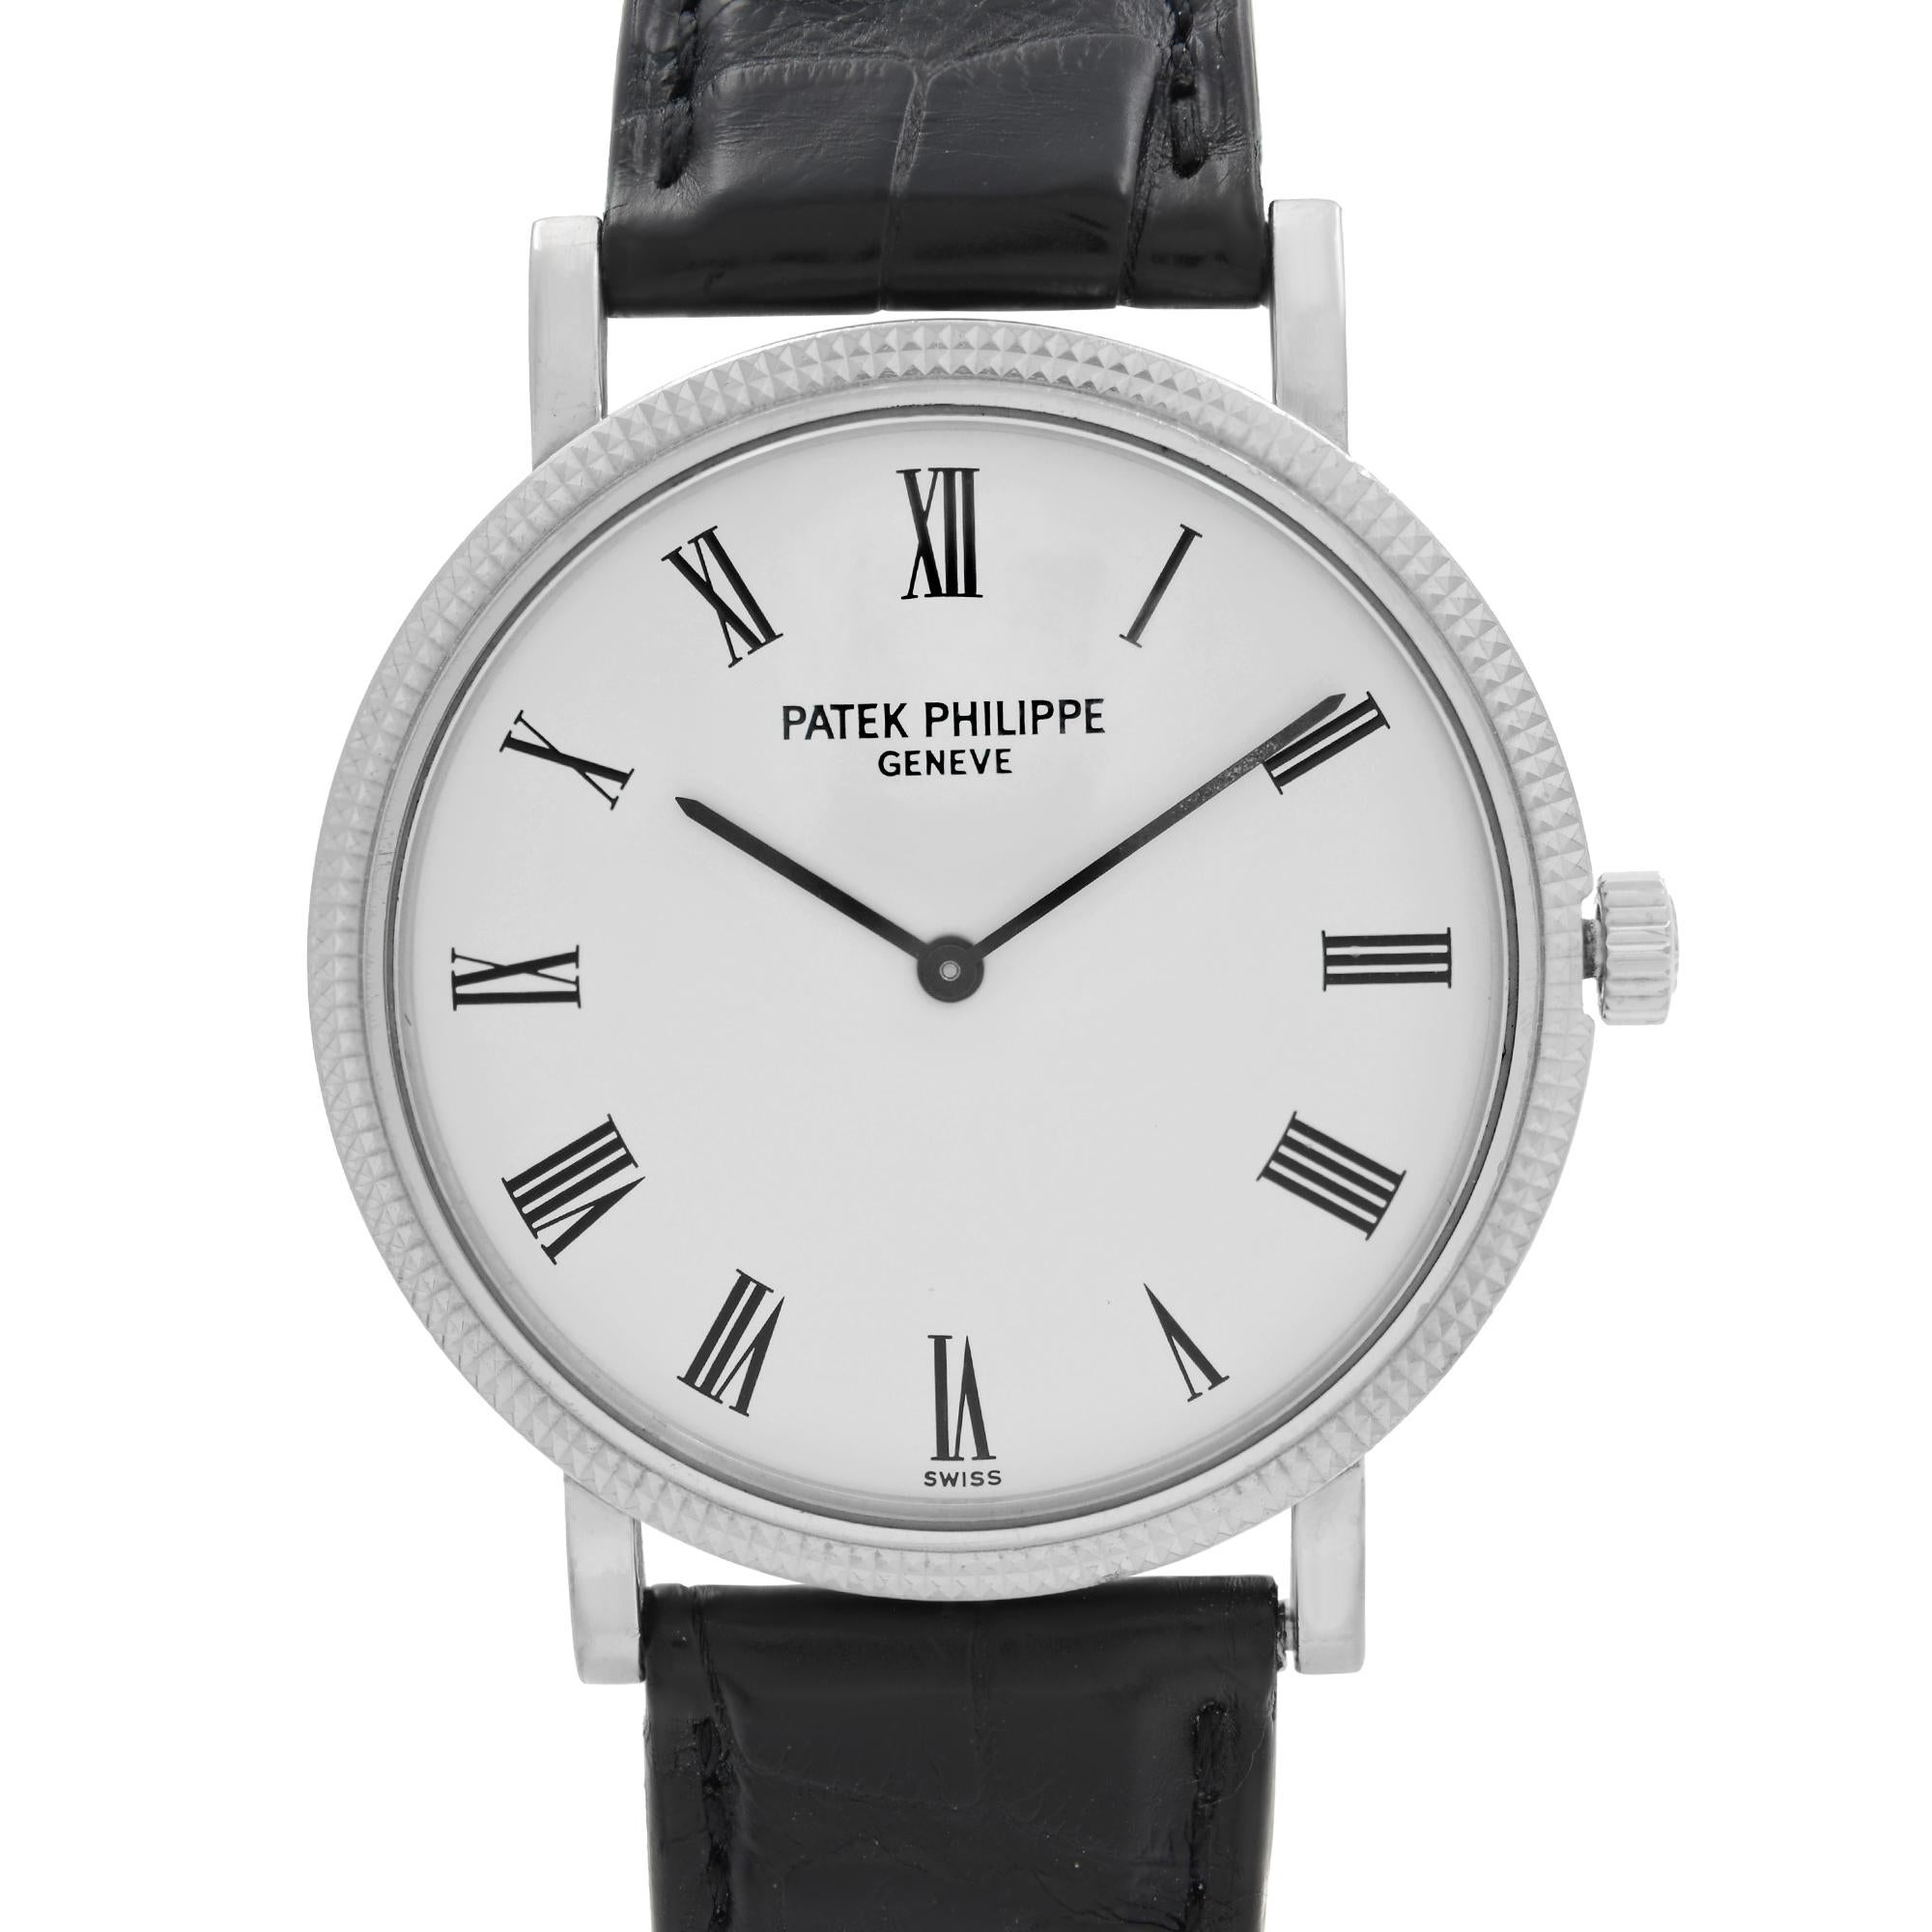 Pre-Owned Patek Philippe Calatrava 35 mm 18k White Gold White Dial Men's Automatic Watch 5120G. The Watch is powered by an Automatic Movement and Features: Polished 18k White Gold Round Case and Two-Piece Leather Strap. Fixed Gold Bezel. White Dial